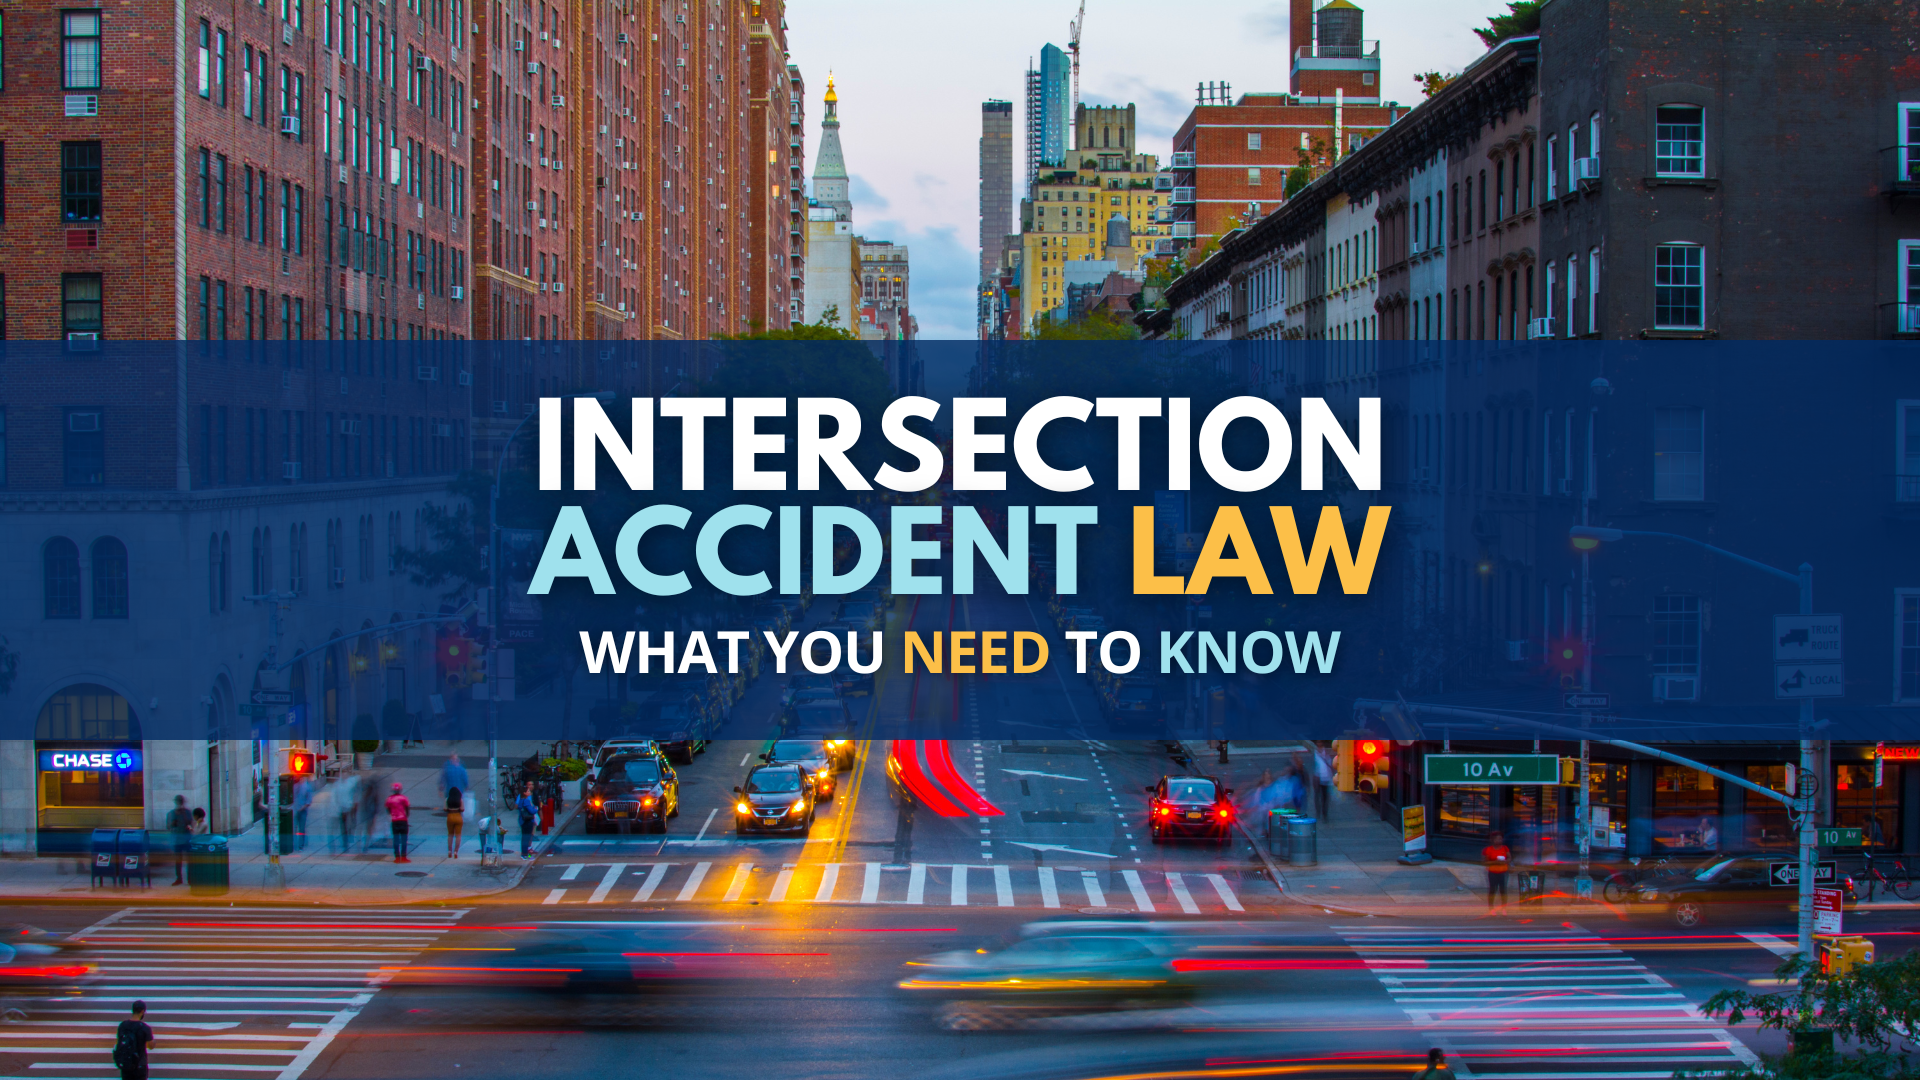 Intersection Accident Law: What You Need To Know